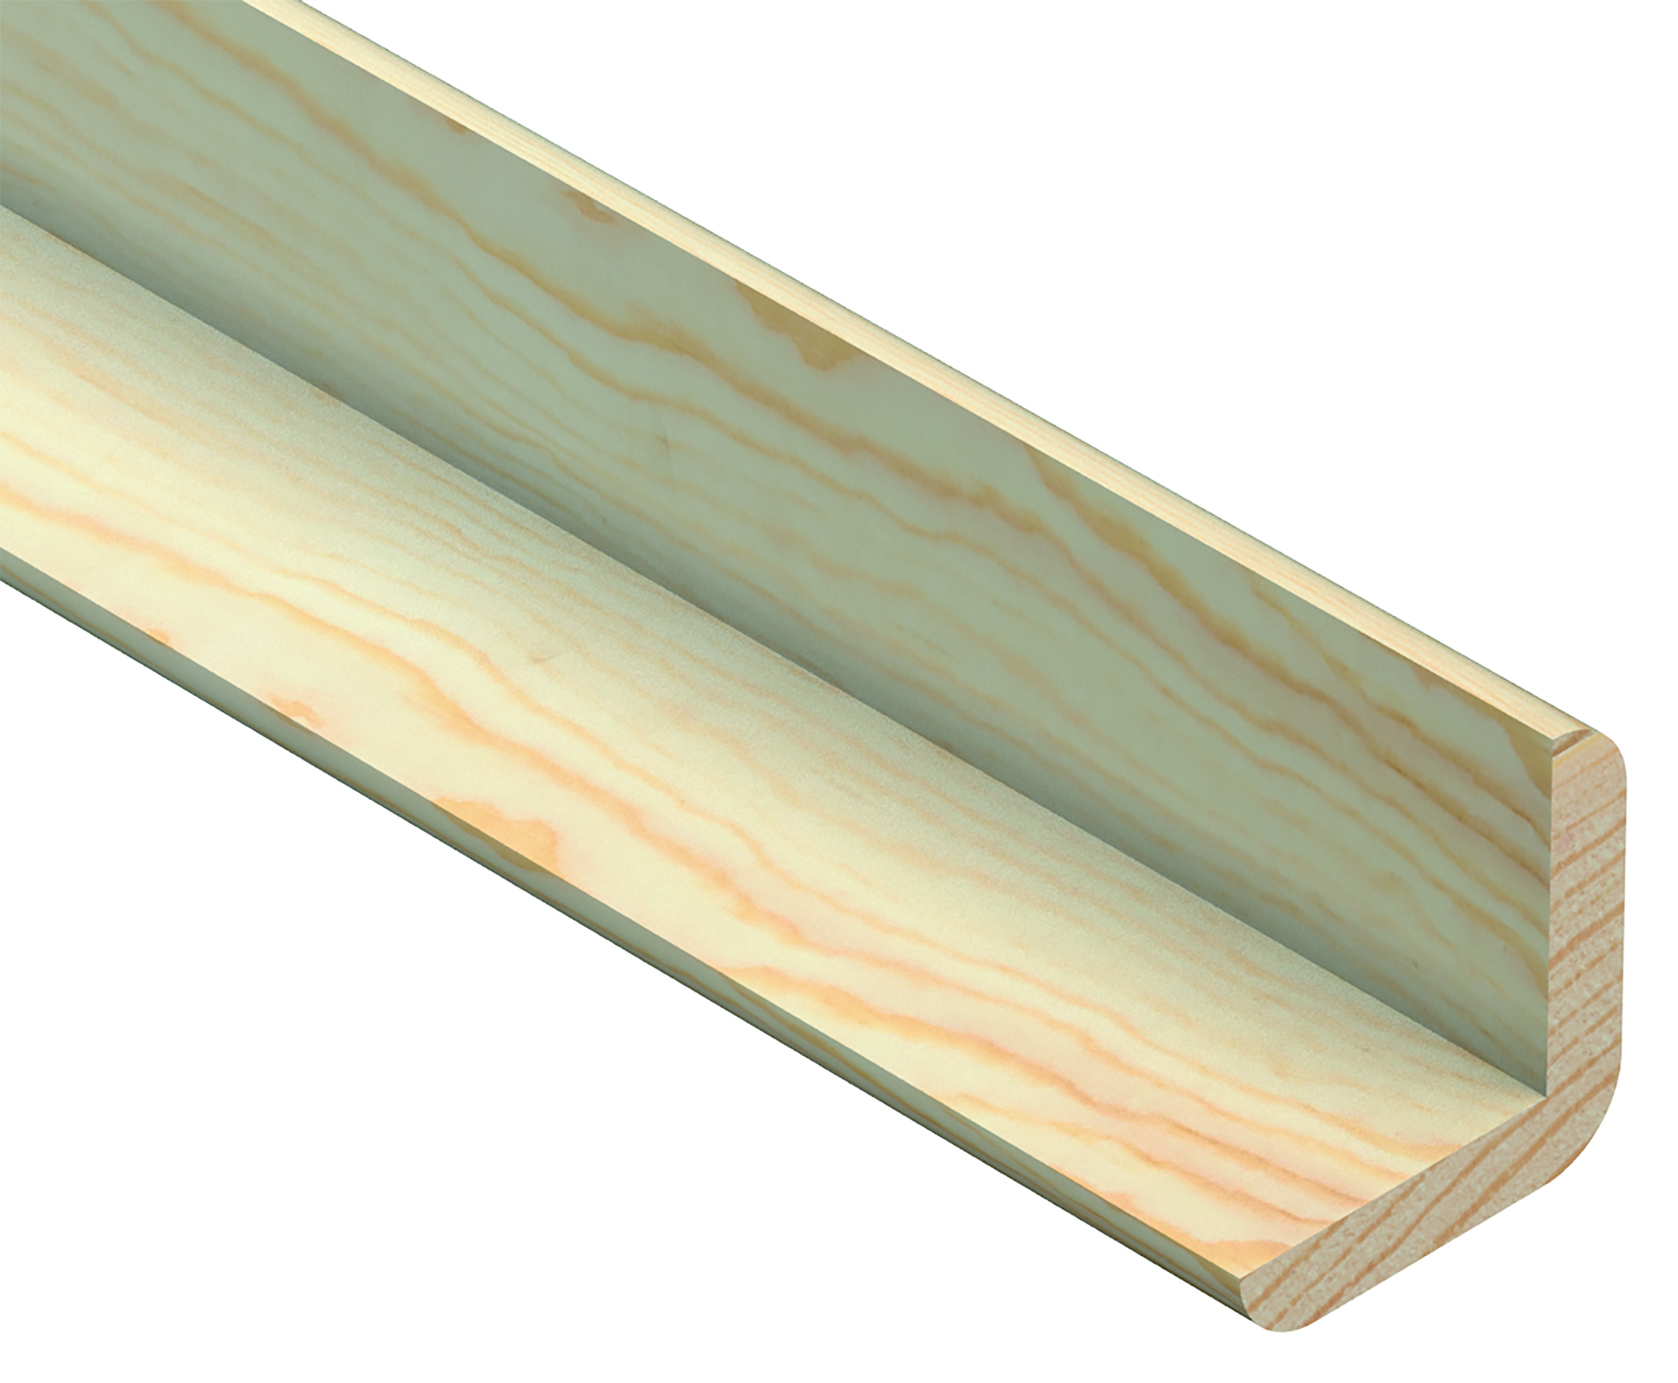 Image of Cheshire Mouldings Pine Angle - 18x18x2400mm